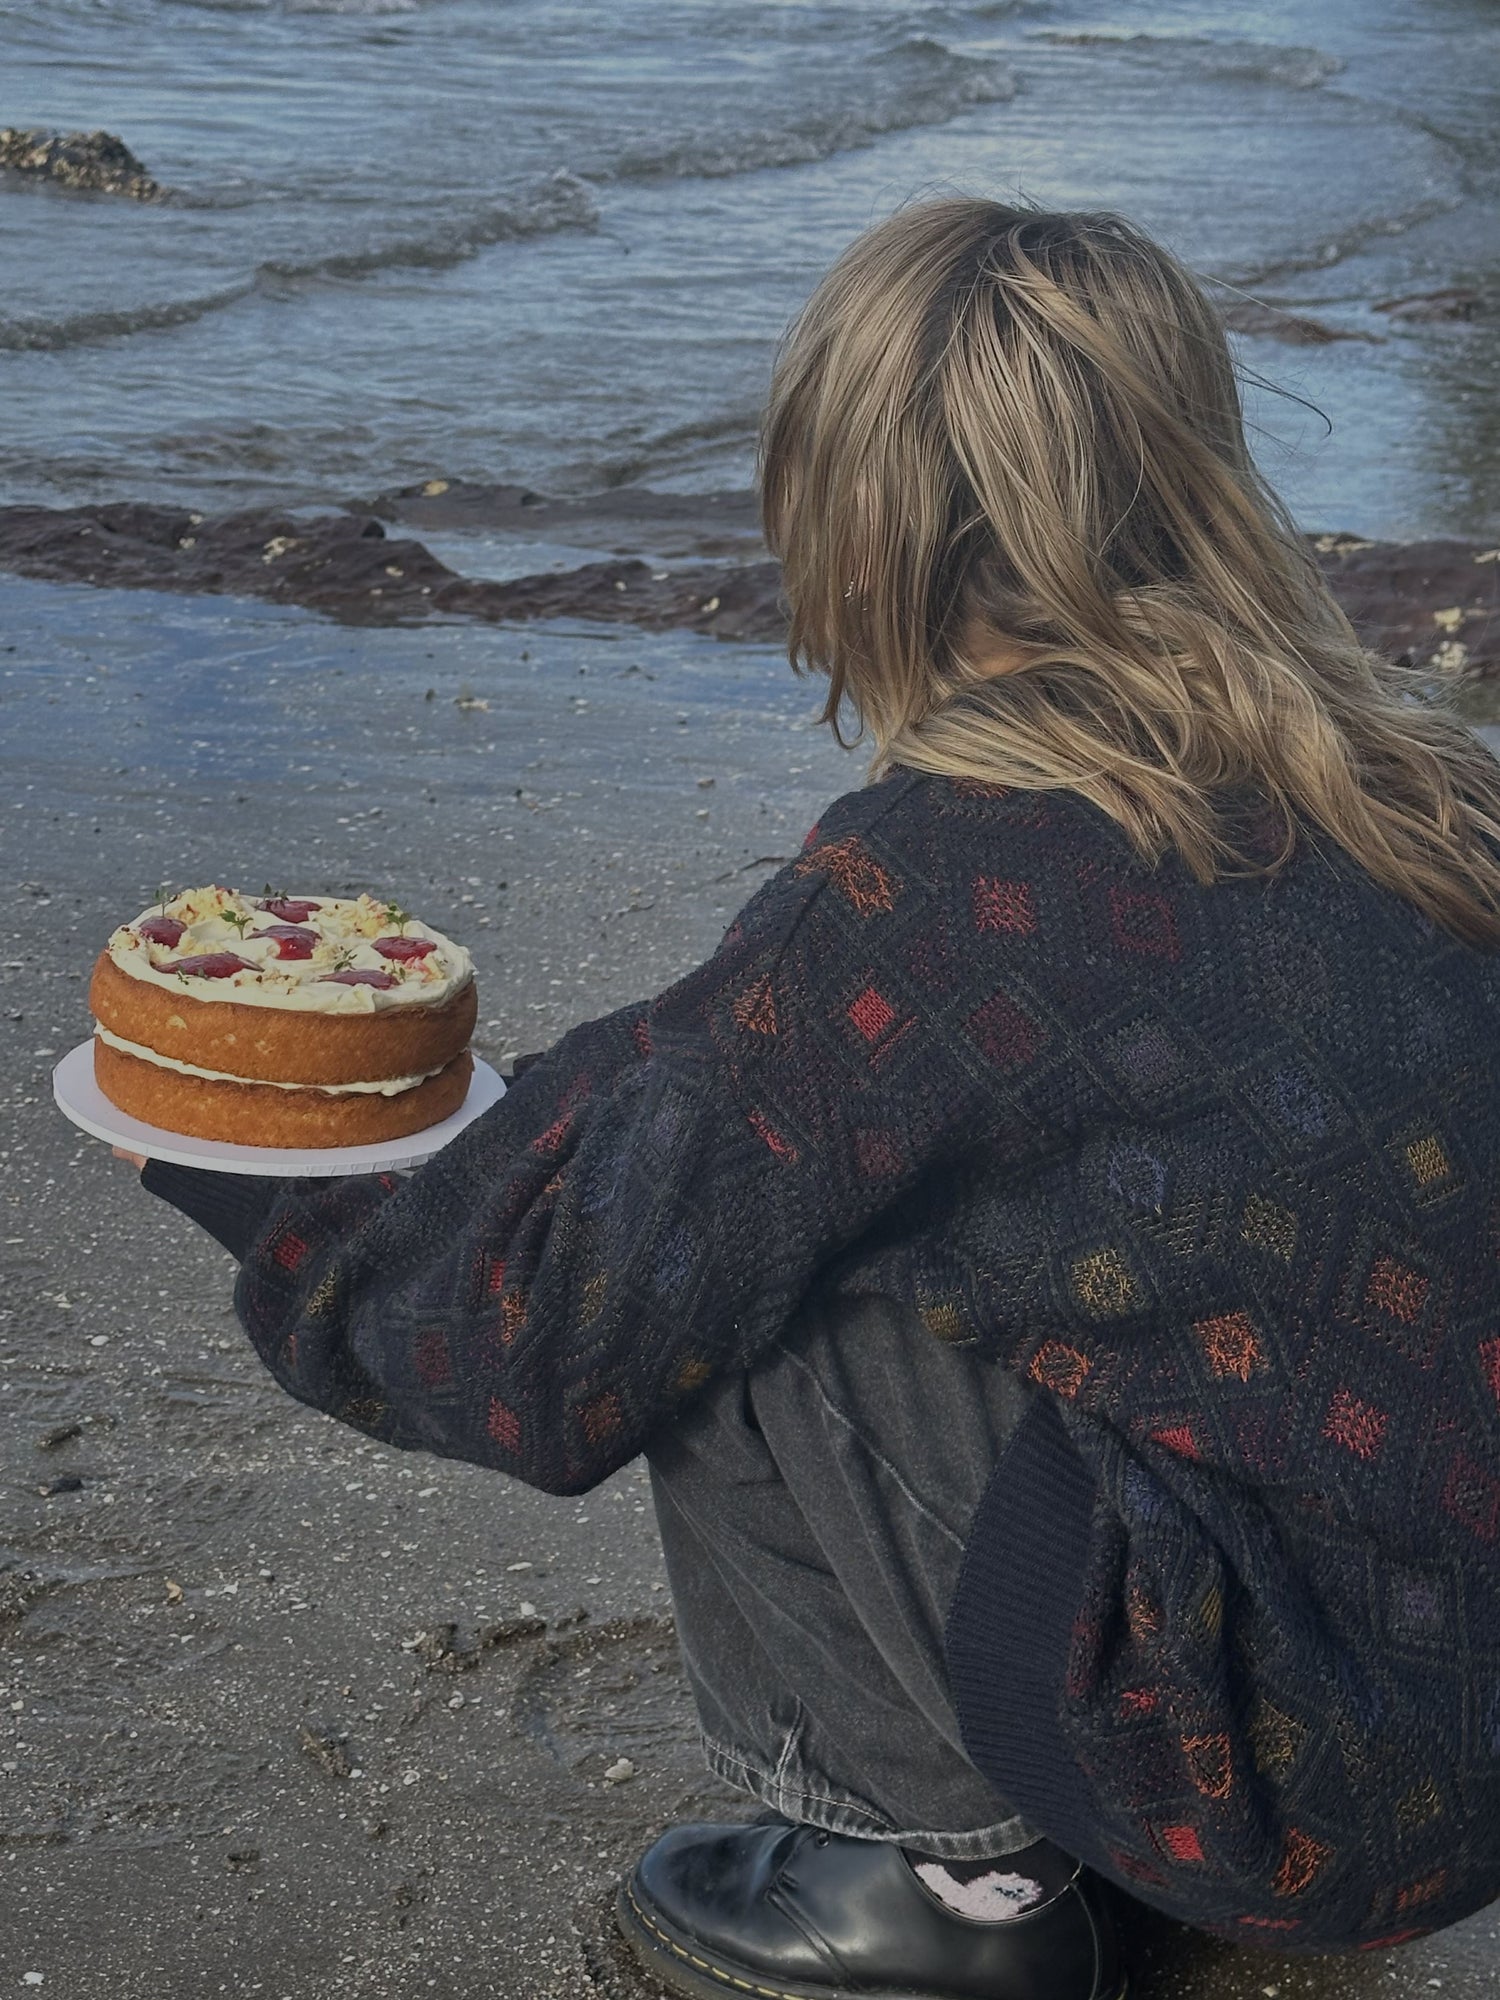 Paloma from Zi Sweet holding a strawberry and mascarpone sponge cake and looking out to sea at the beach.